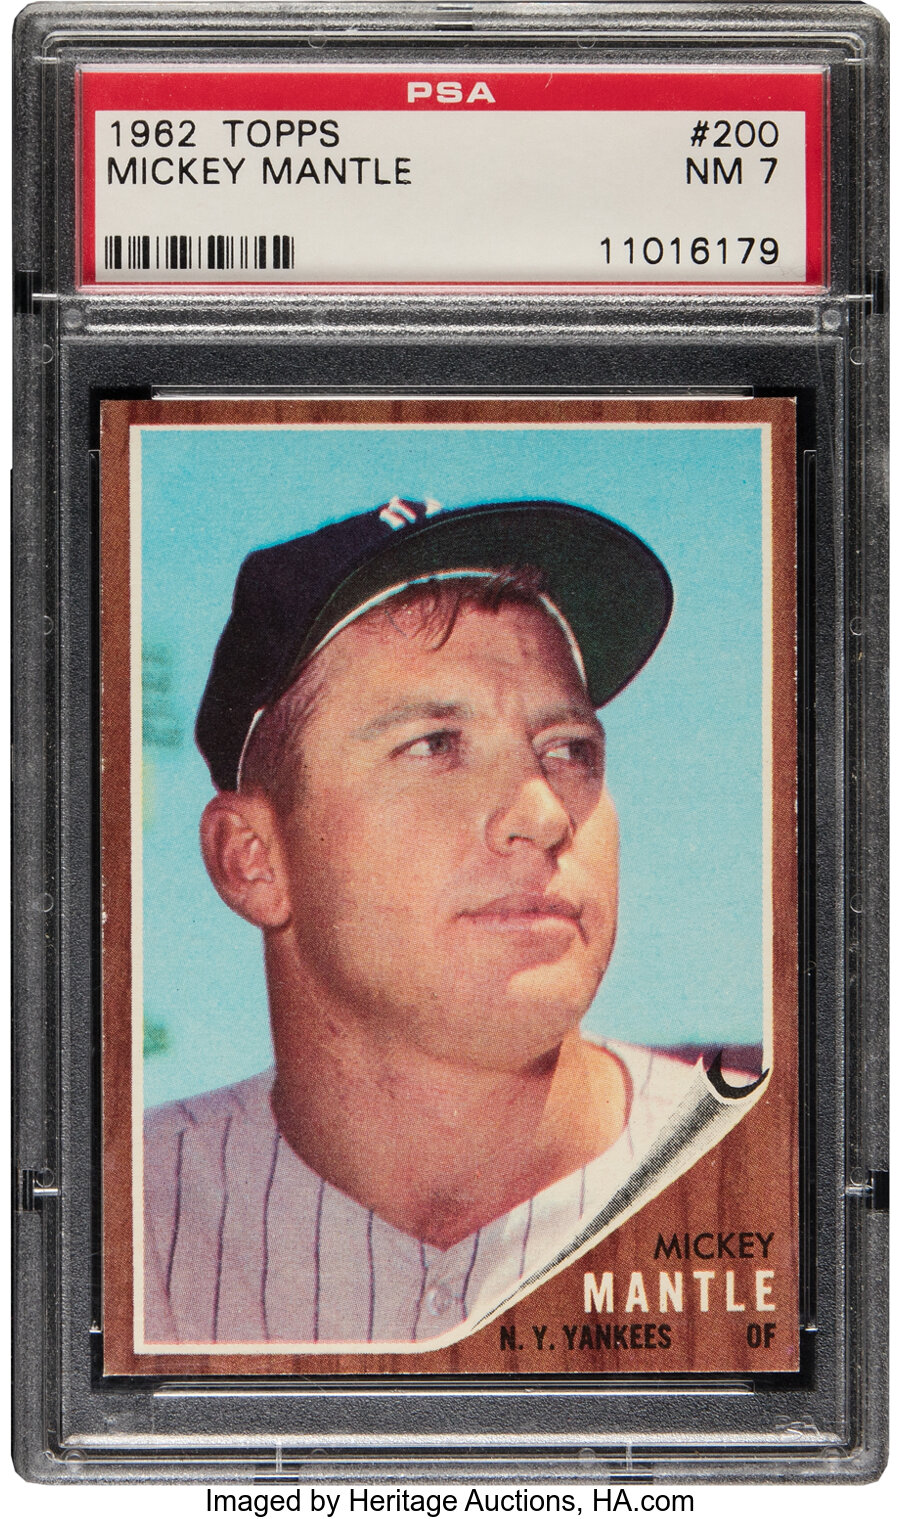 1962 Topps Mickey Mantle #200 PSA NM 7